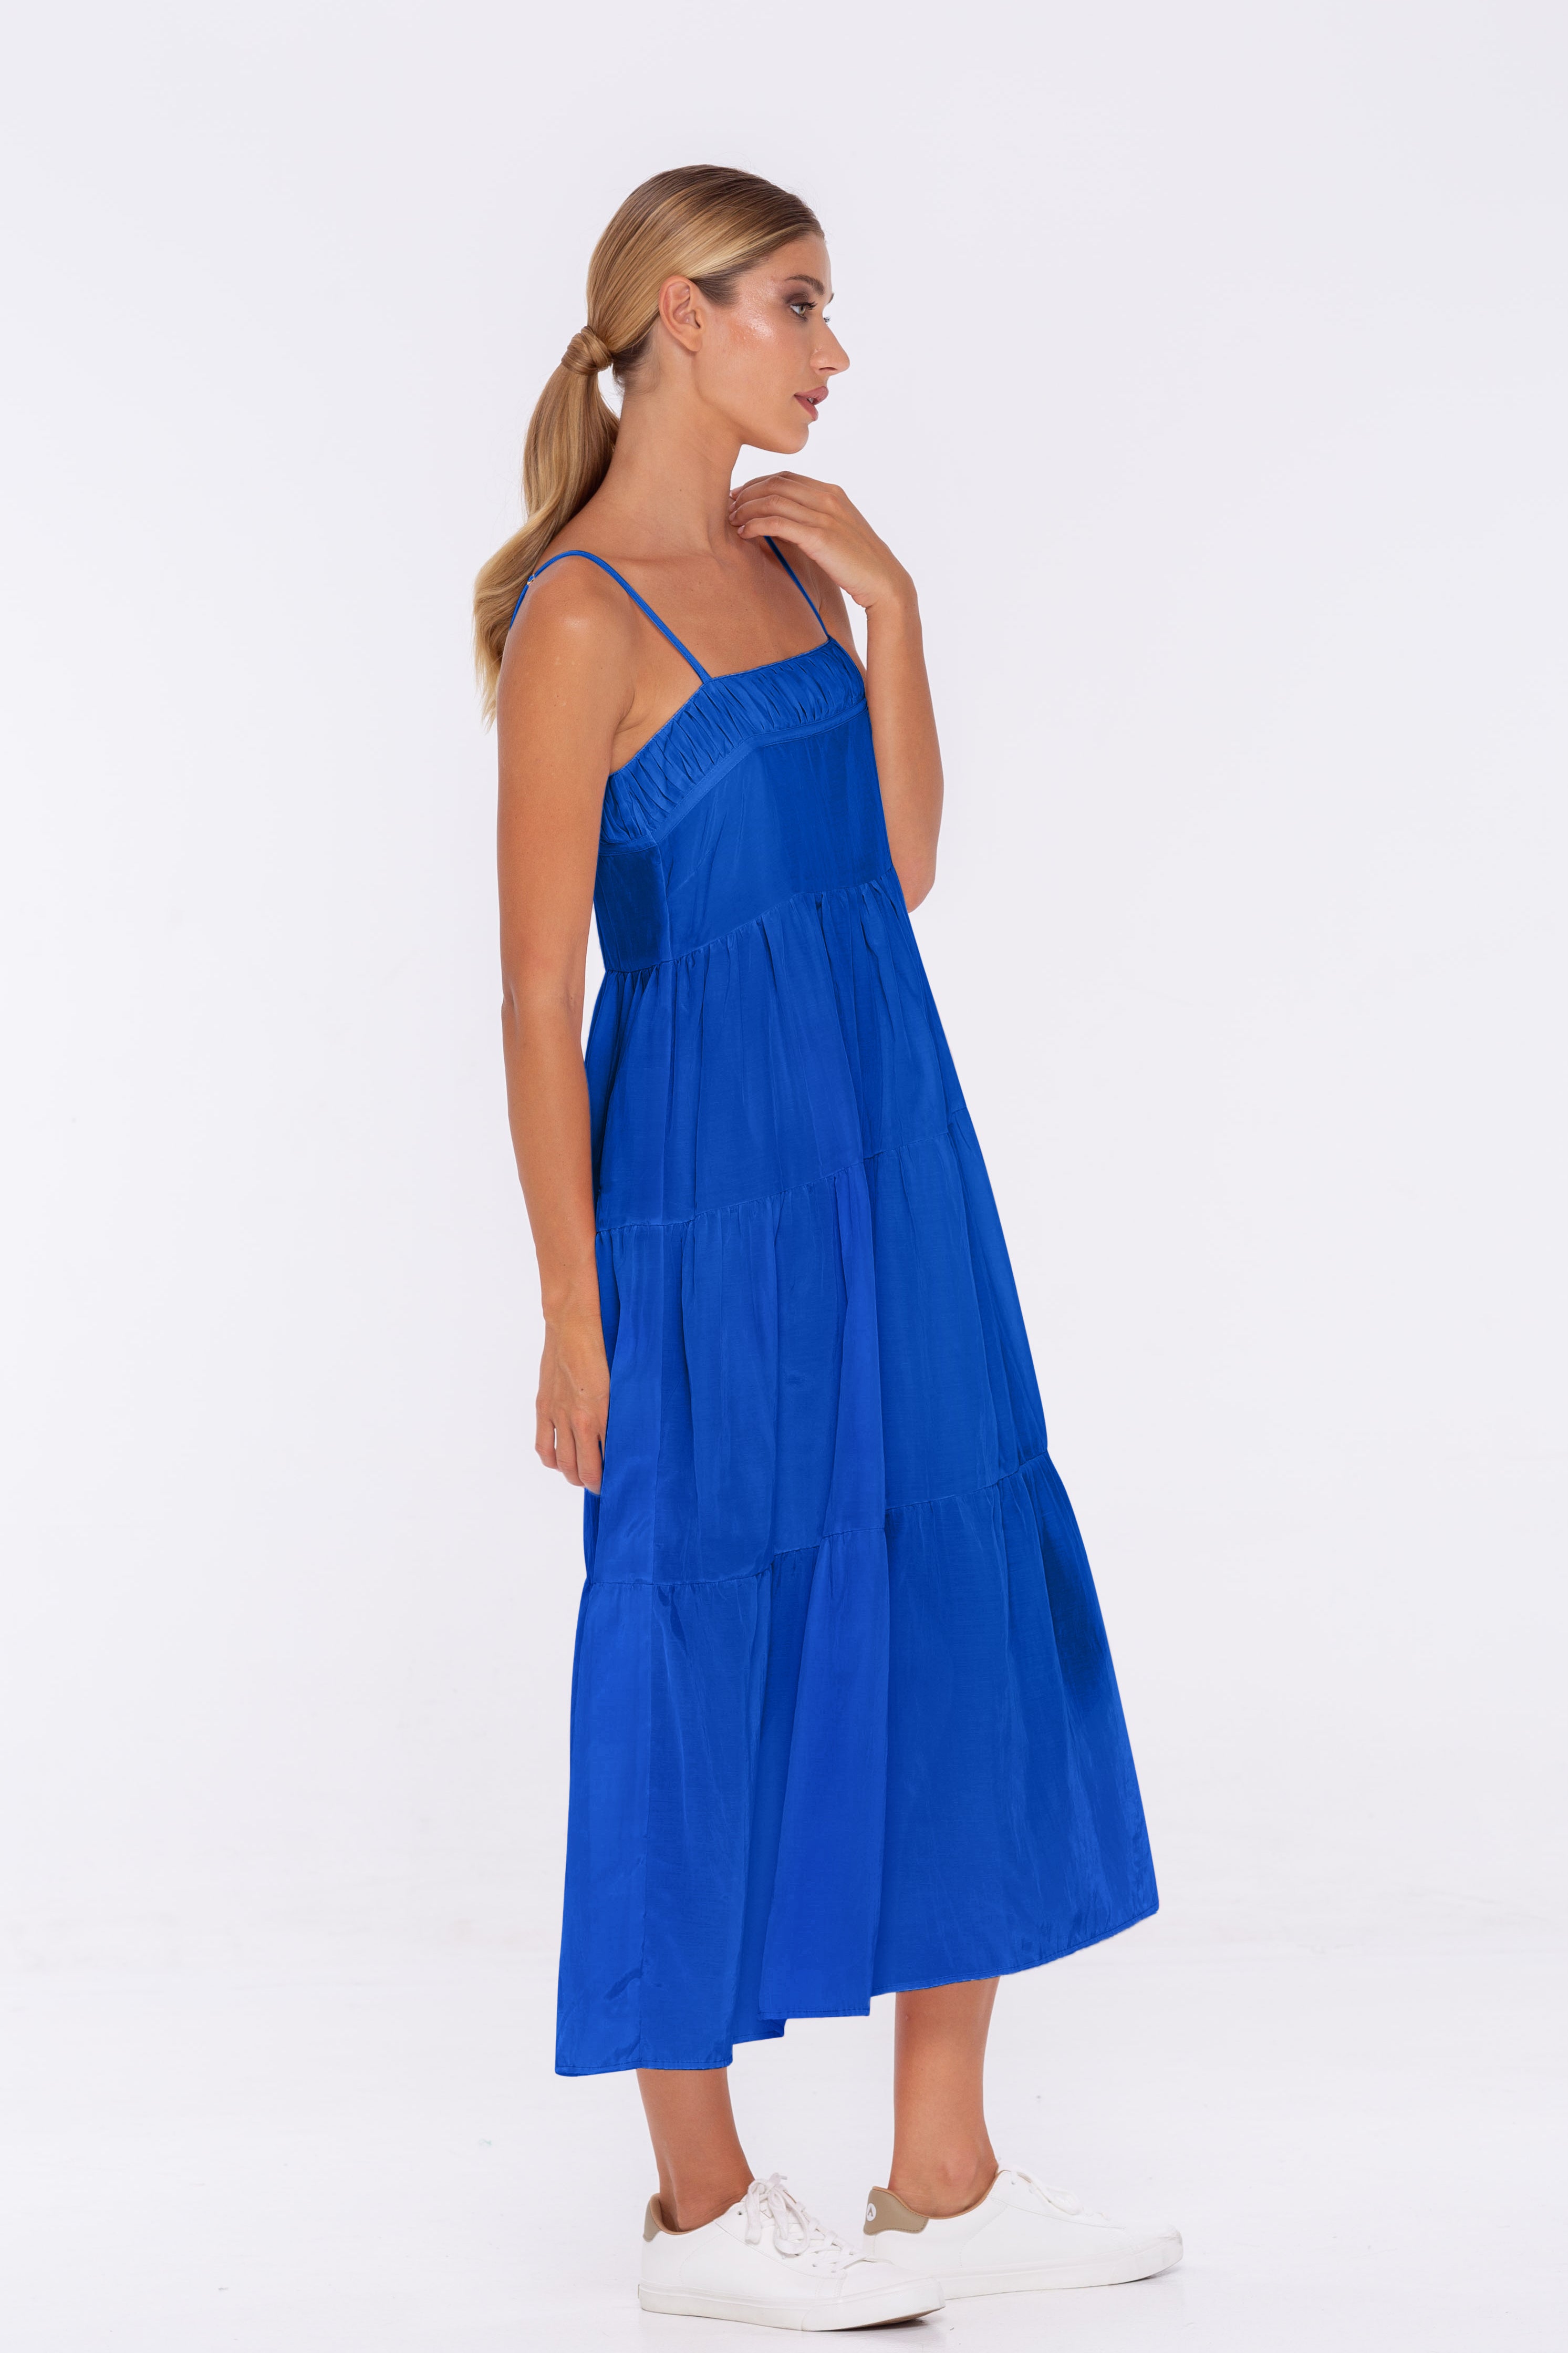 Fly To You Dress - Cobalt